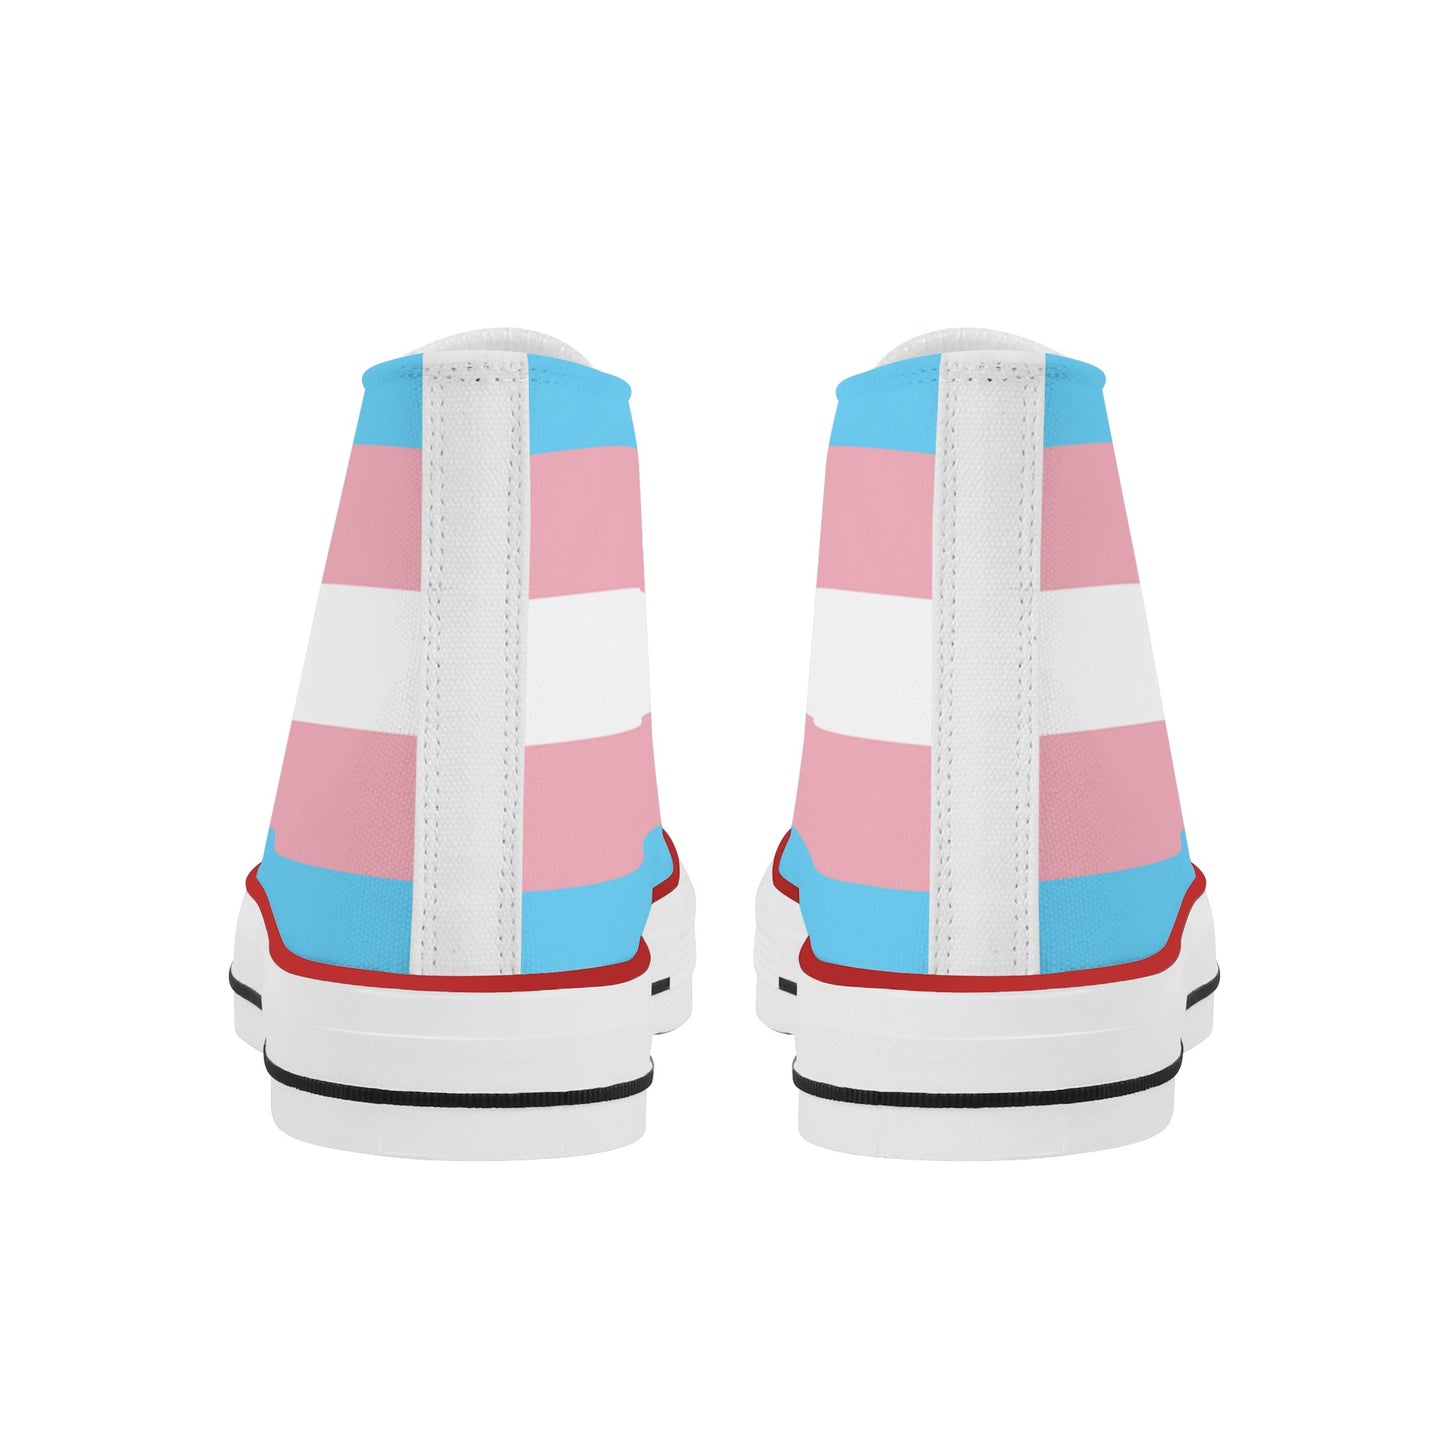 Transgender Pride Collection - Mens Classic High Top Canvas Shoes for the LGBTQIA+ community